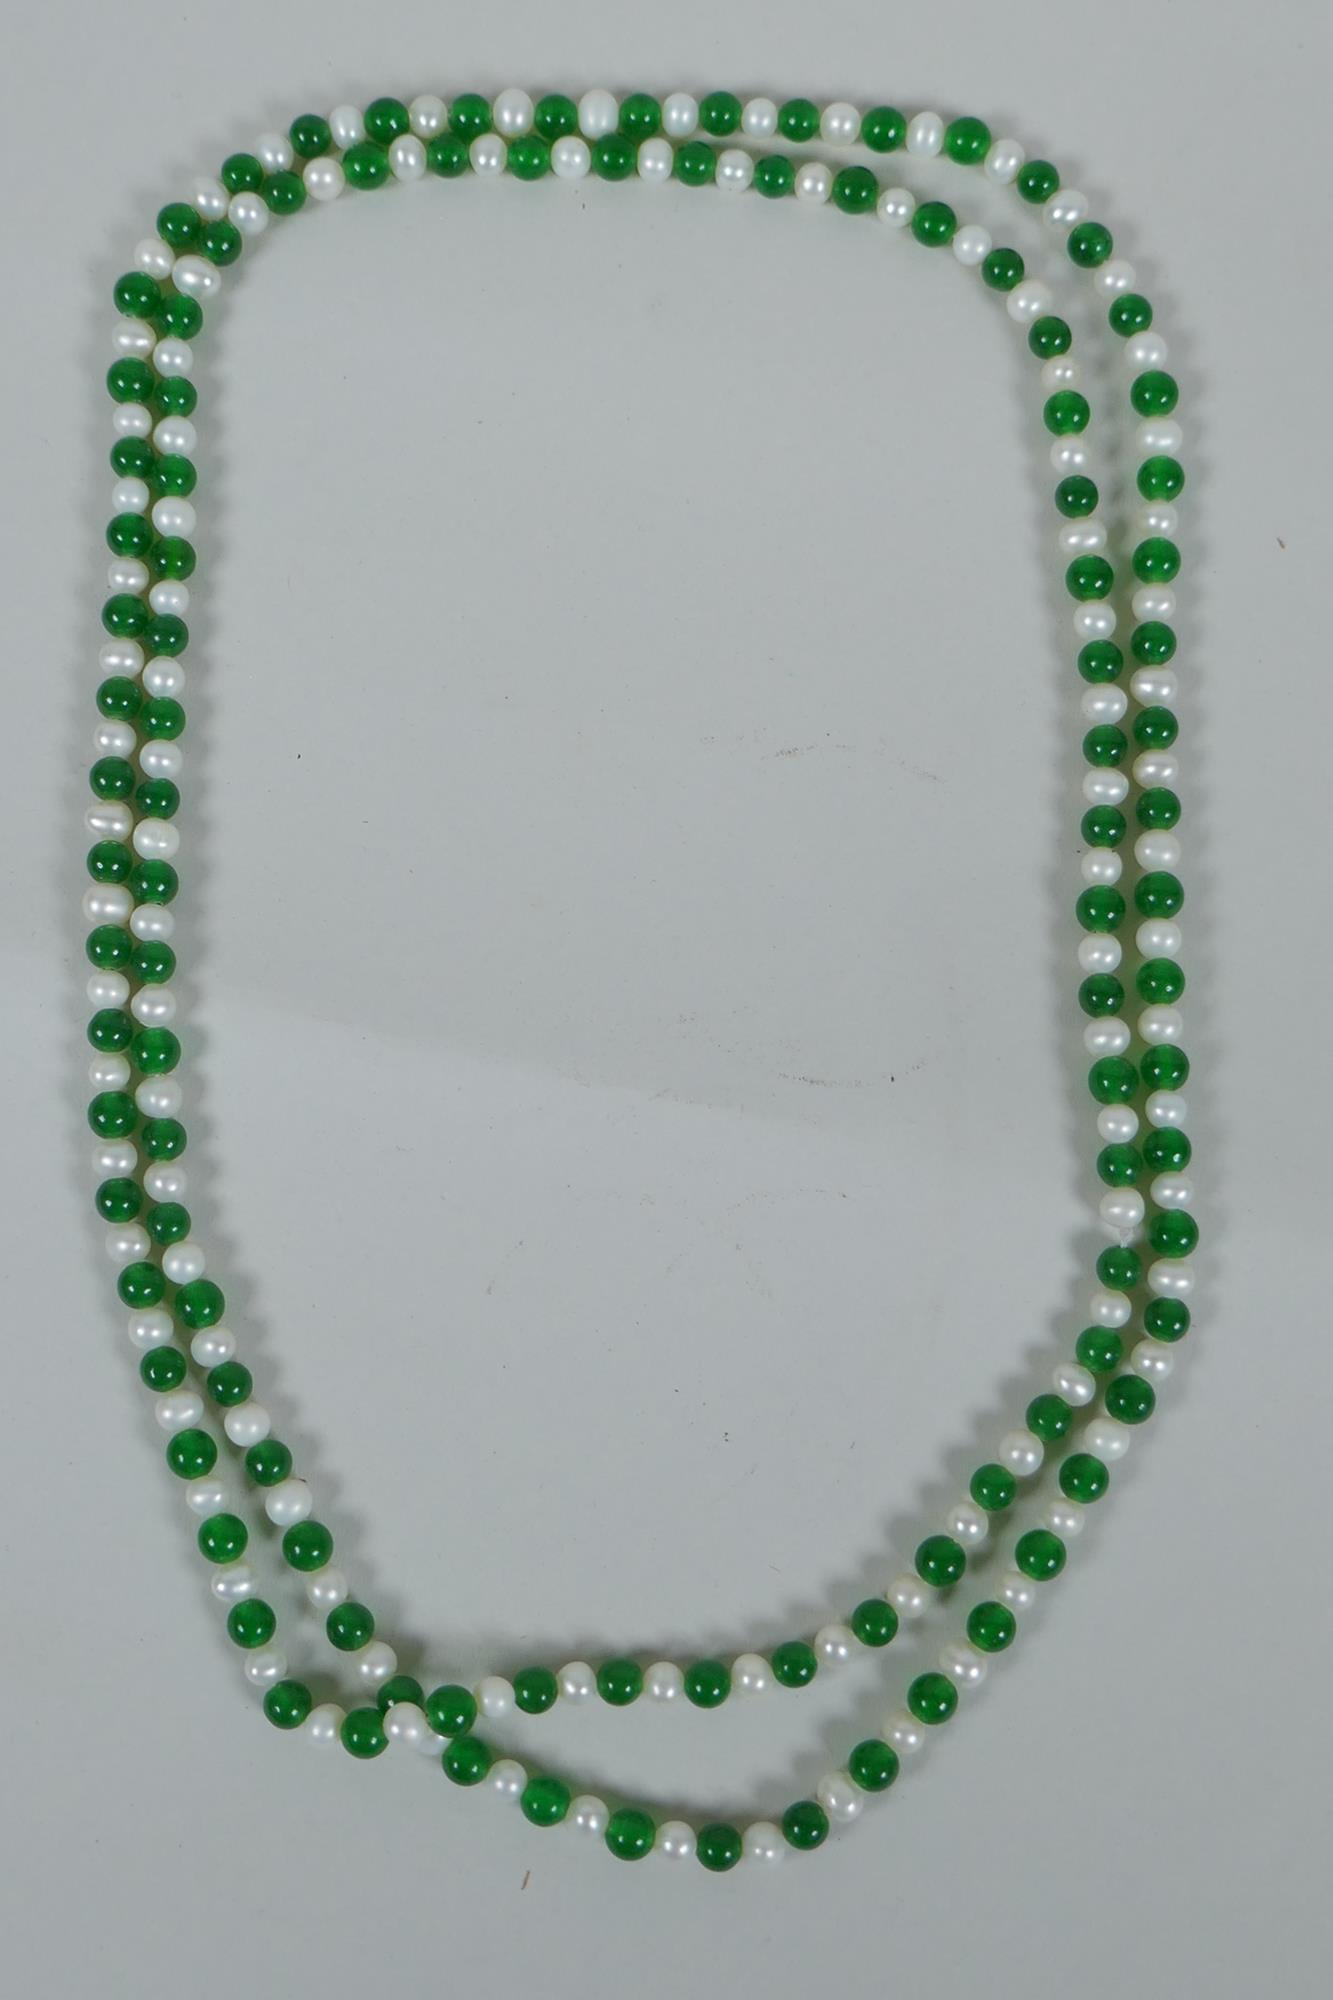 A green hardstone and faux pearl bead necklace, 120cm long